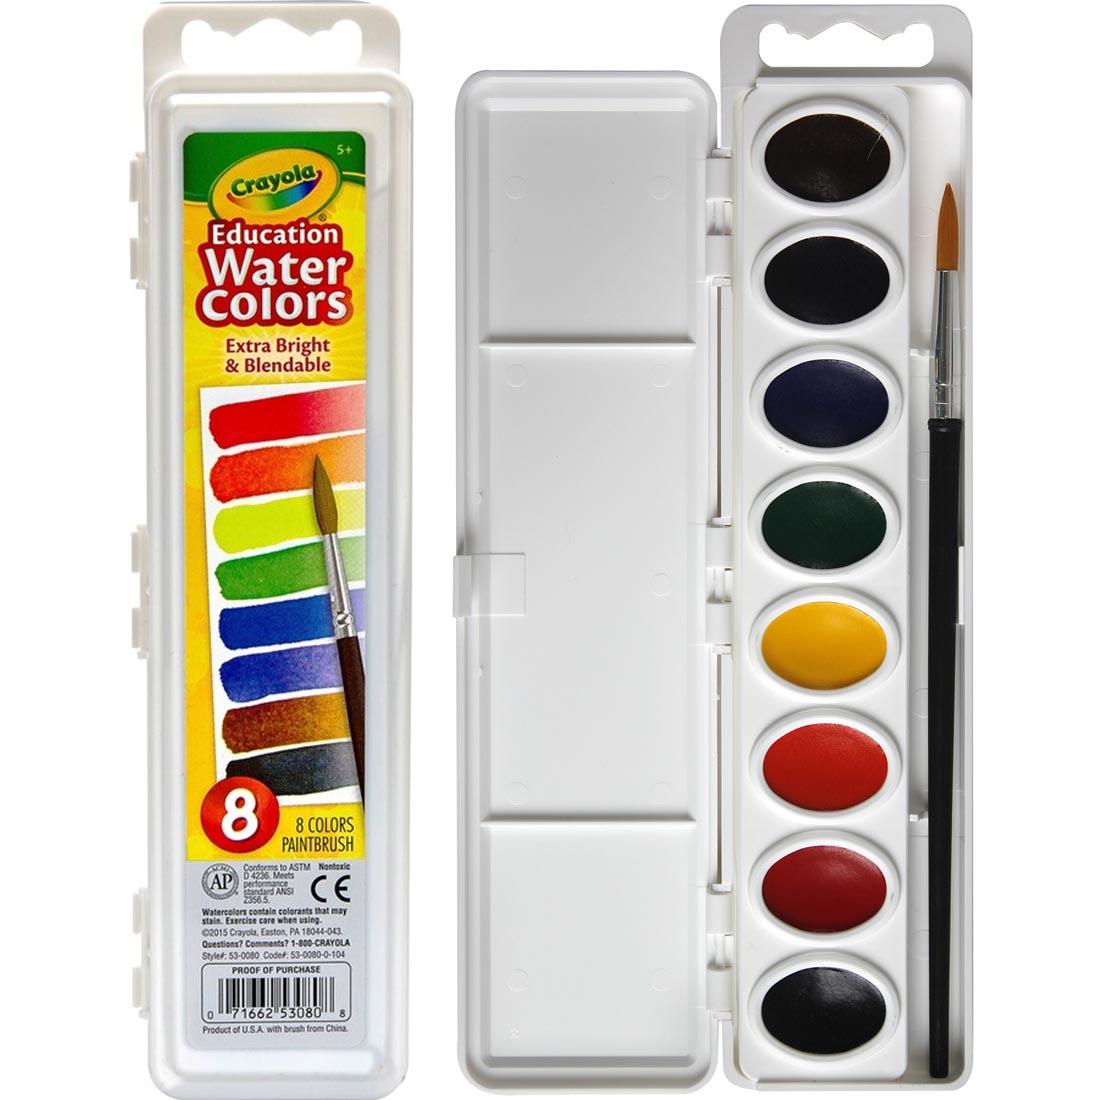 Package of Crayola Oval Pan Watercolors 8-Color Set shown with lid both open and closed